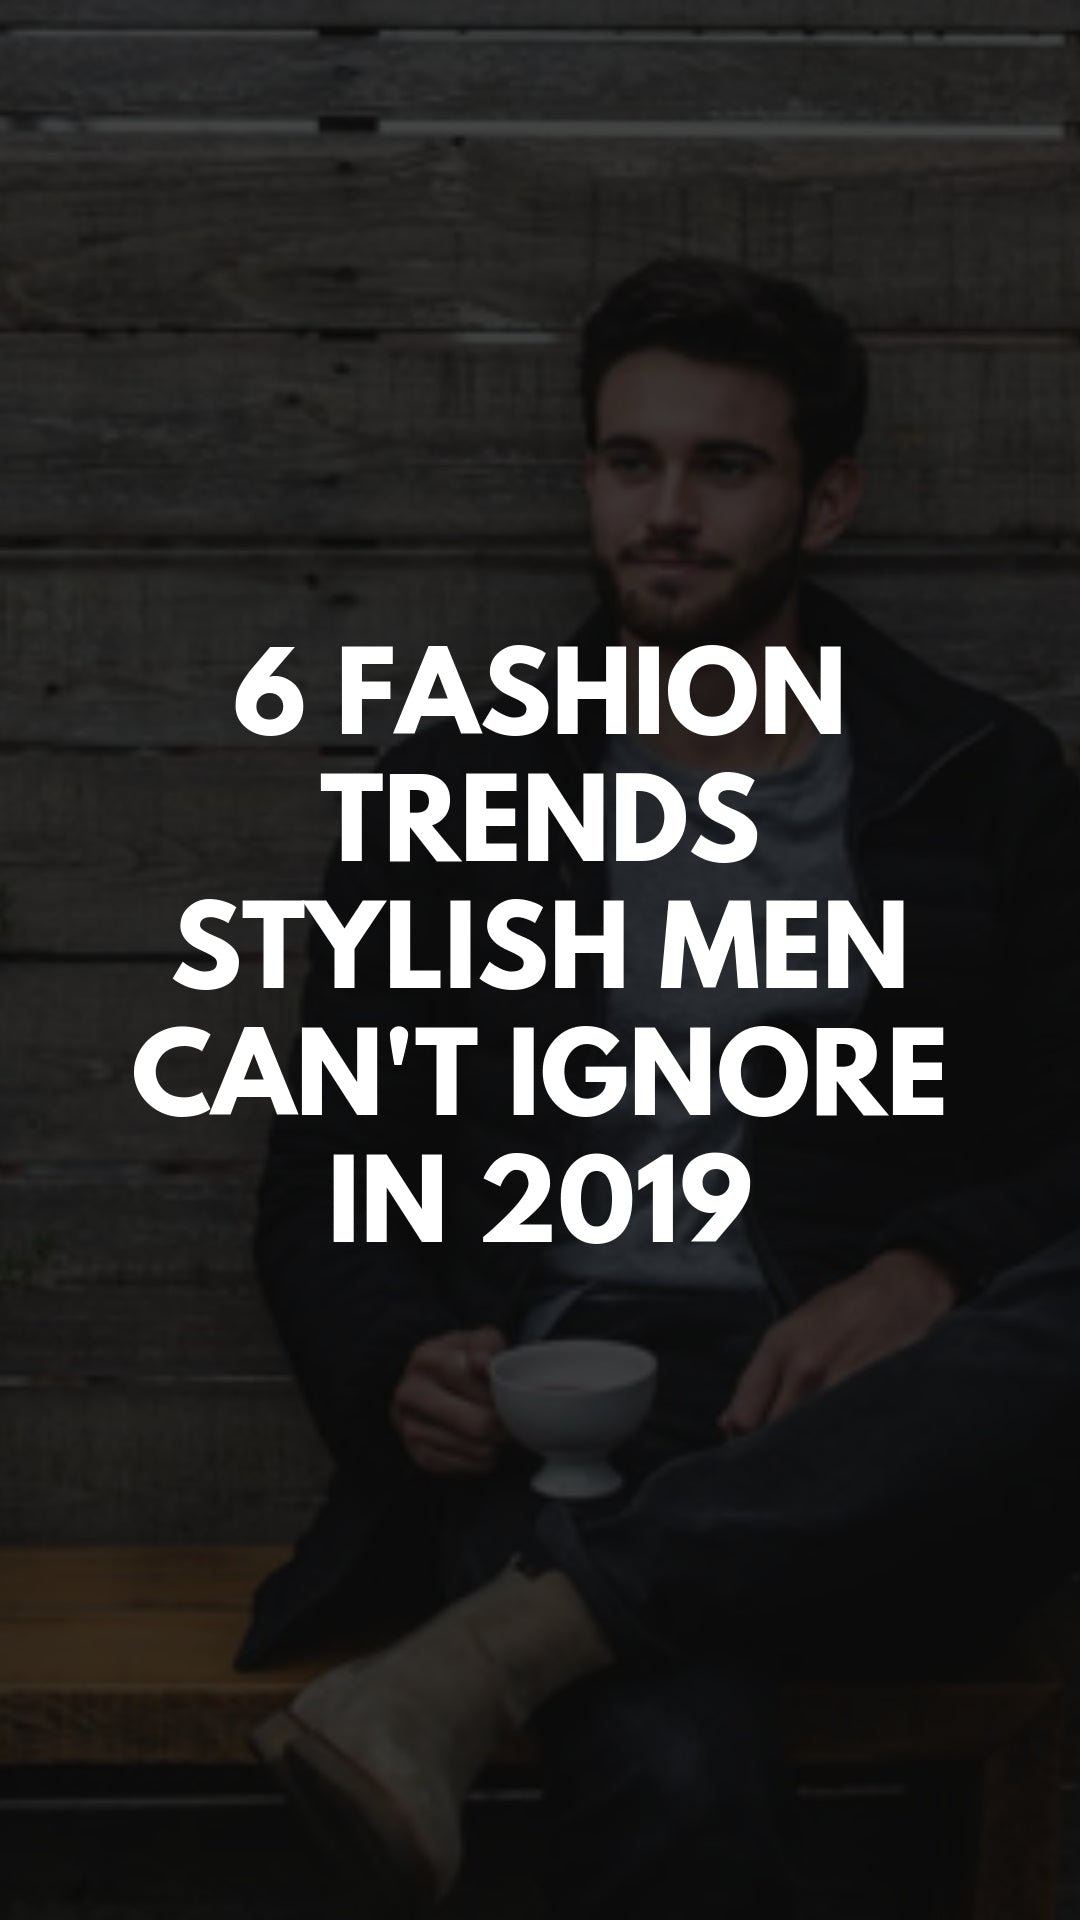 6 Fashion Trends Stylish Men Can't Ignore in 2019